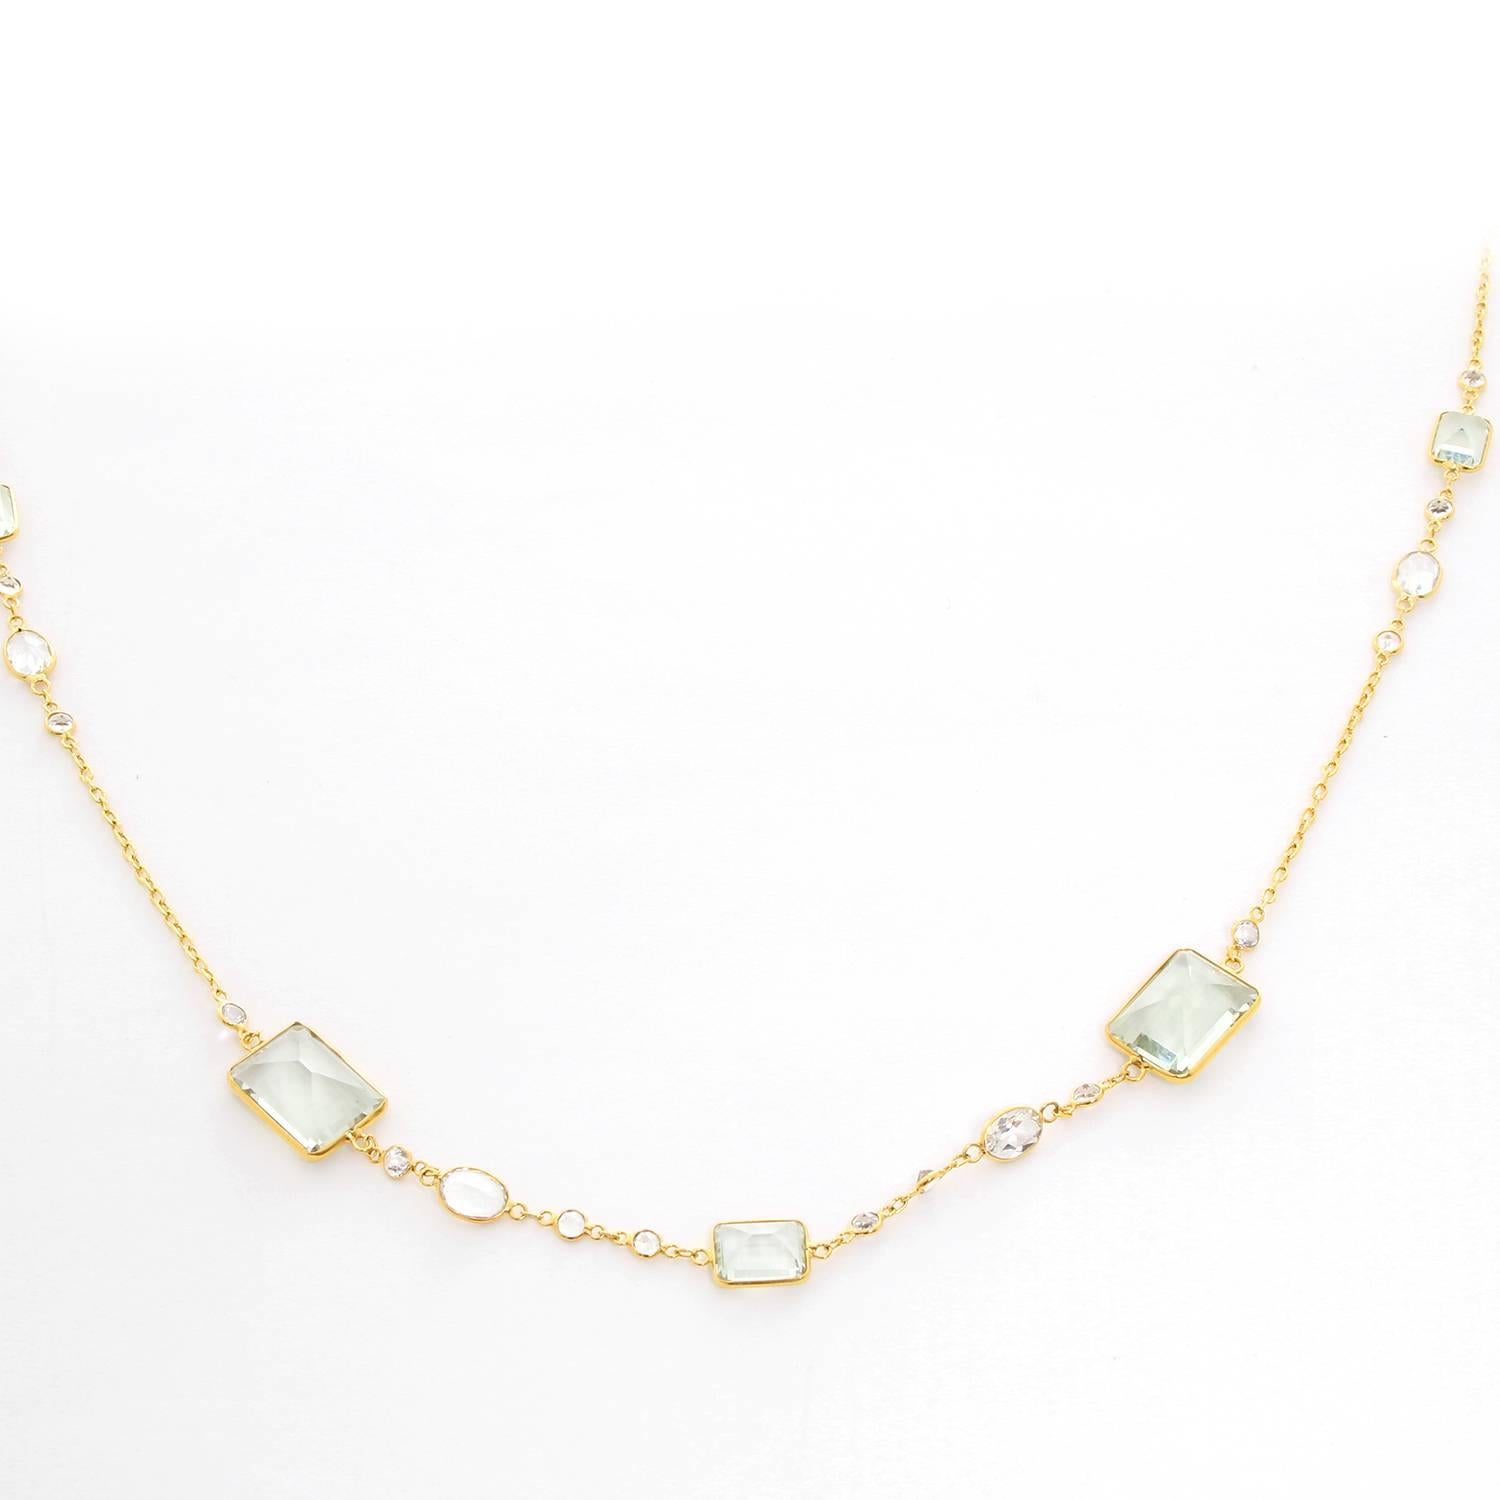 14K Yellow Gold White Topaz & Green Amethyst by the Yard Necklace - . 14K Yellow Gold with Large Green Amethyst stones alternating with smaller White Topaz stones weighing. Length 40 inches. Total weight 21.1 grams.